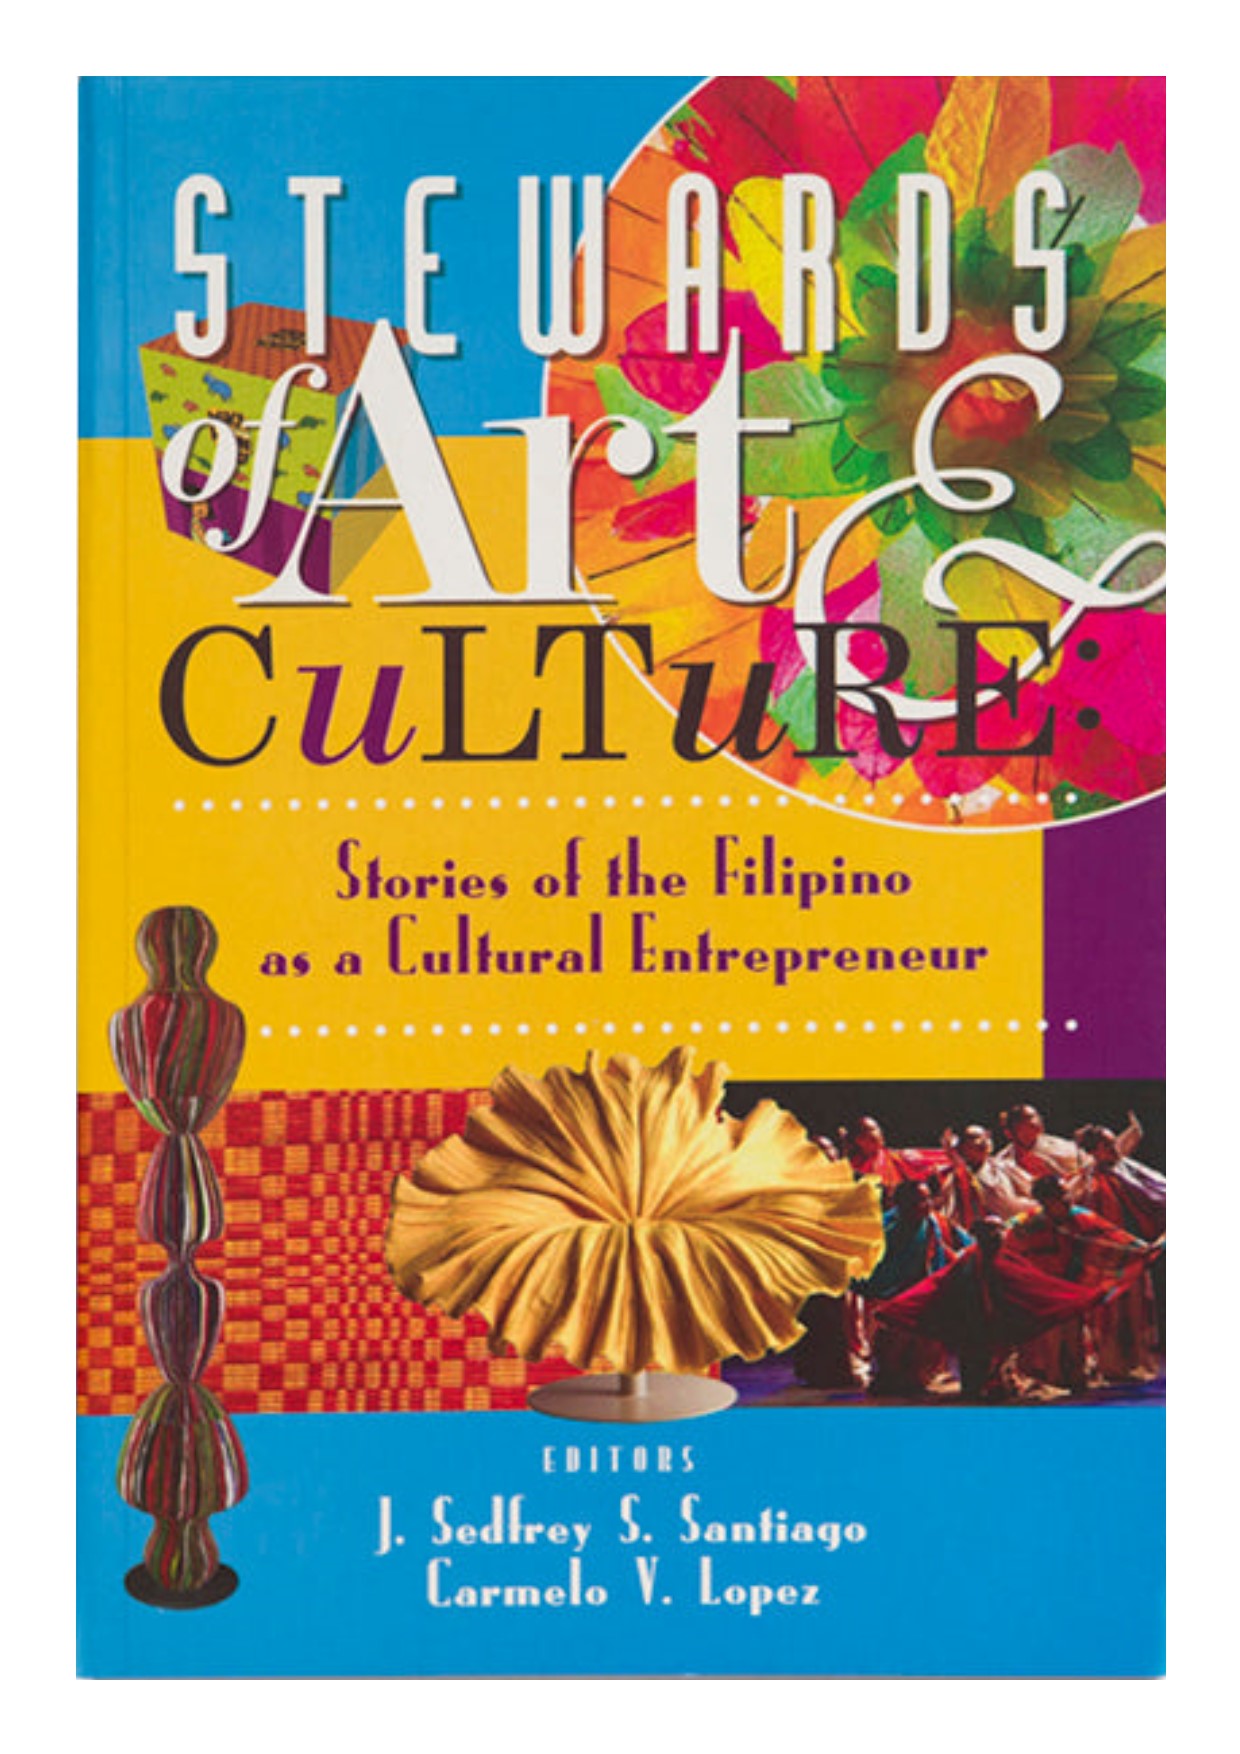 Stewards of art & culture stories of the Filipino as a cultural entrepreneur